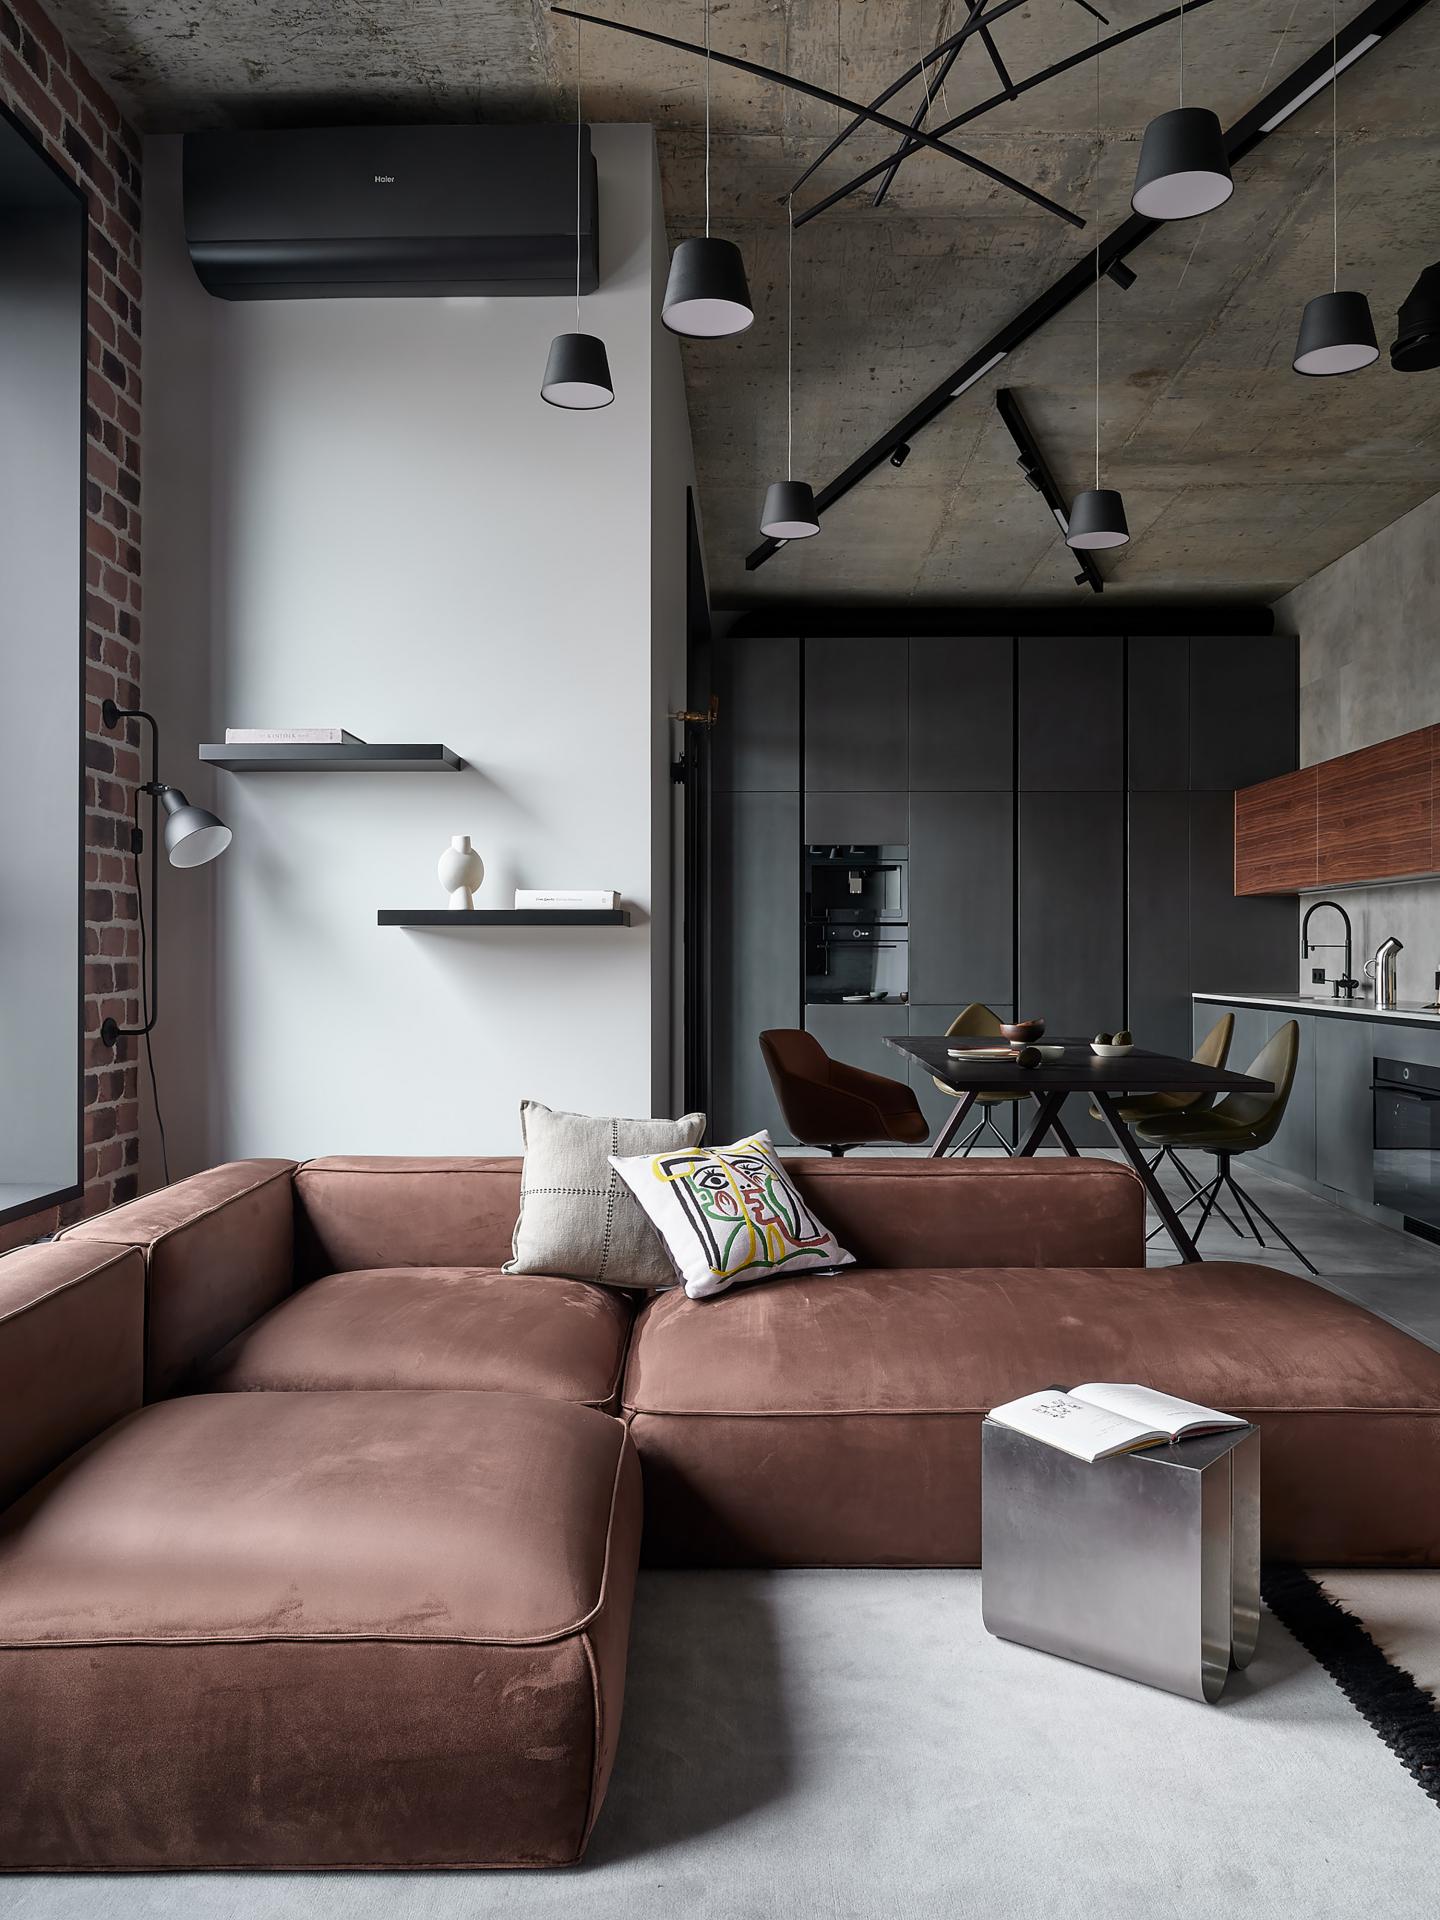 This Charming 680 sq. ft. Industrial Loft in Moscow is Home to a Couple and Their Cat